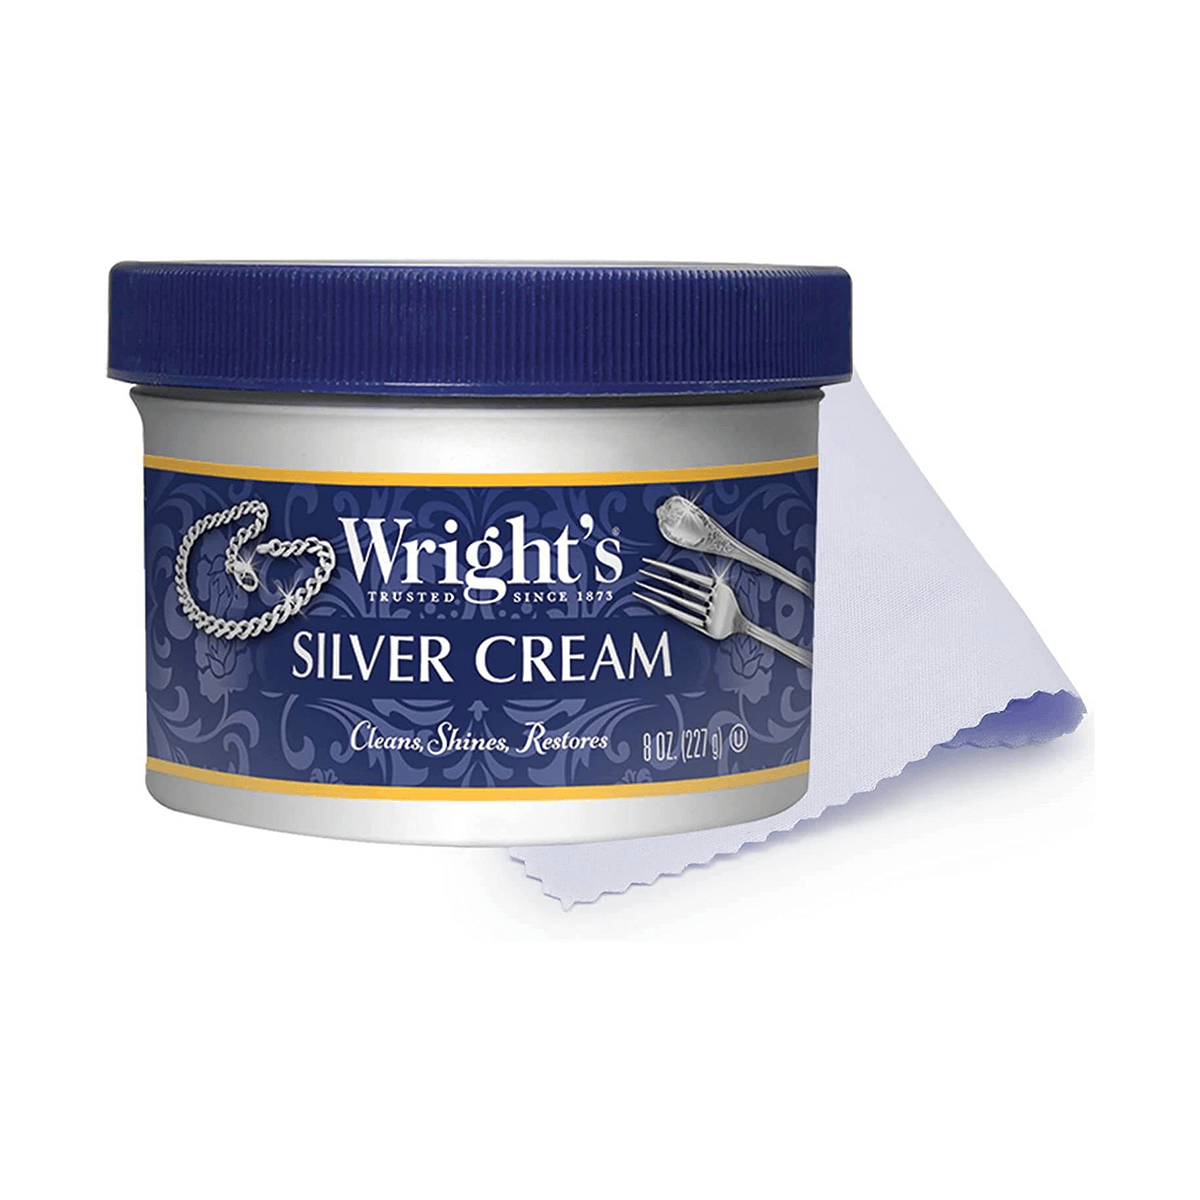 Wright's Silver Cleaner and Polish Cream, $9.20